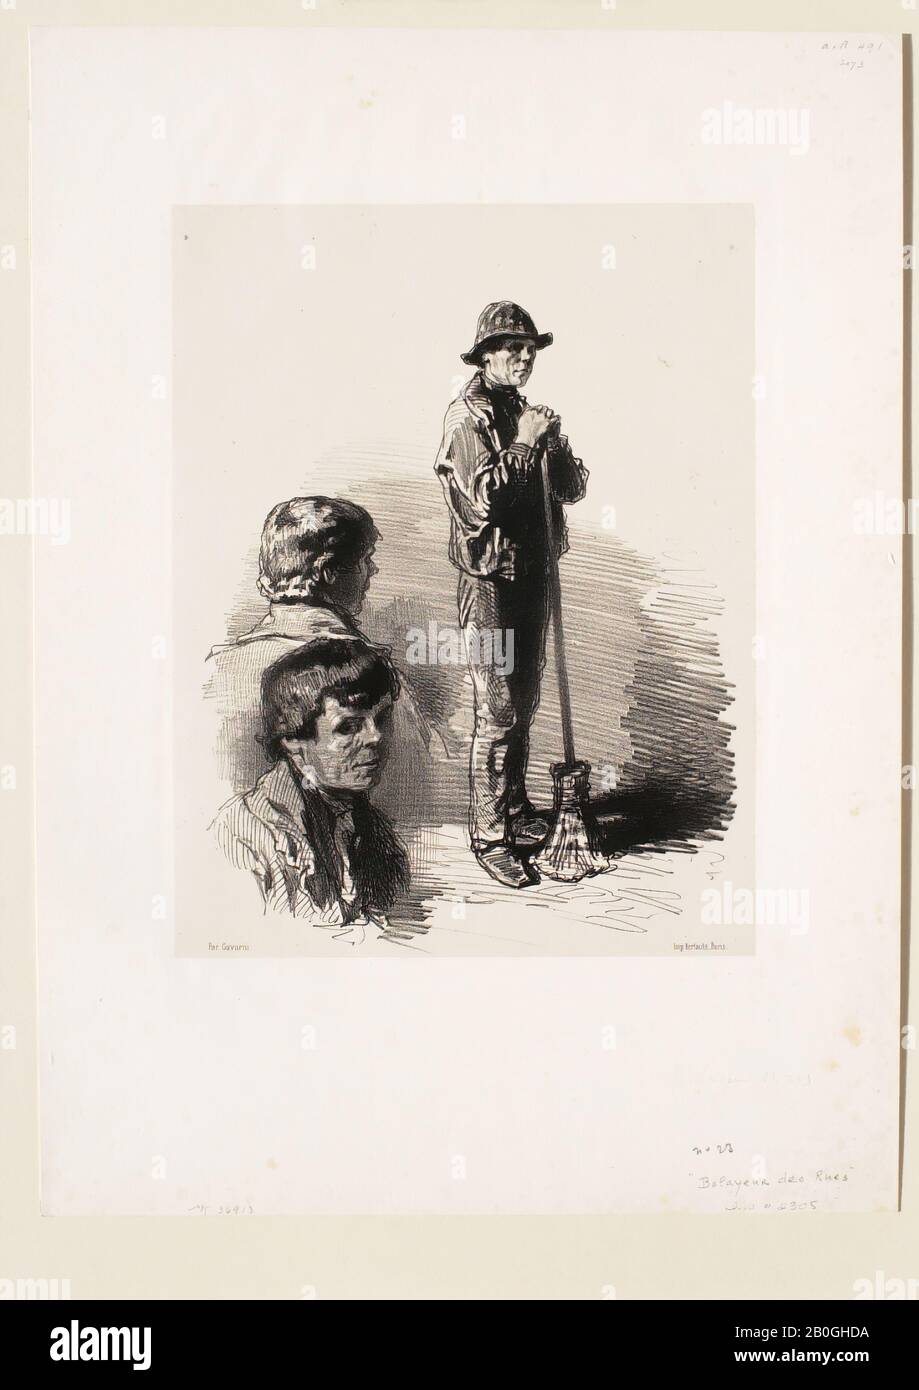 Paul Gavarni, French, 1804–1866, Balayeur des rues, 1814–1866, Lithograph on paper, image: 10 1/16 x 7 3/4 in. (25.5 x 19.7 cm Stock Photo